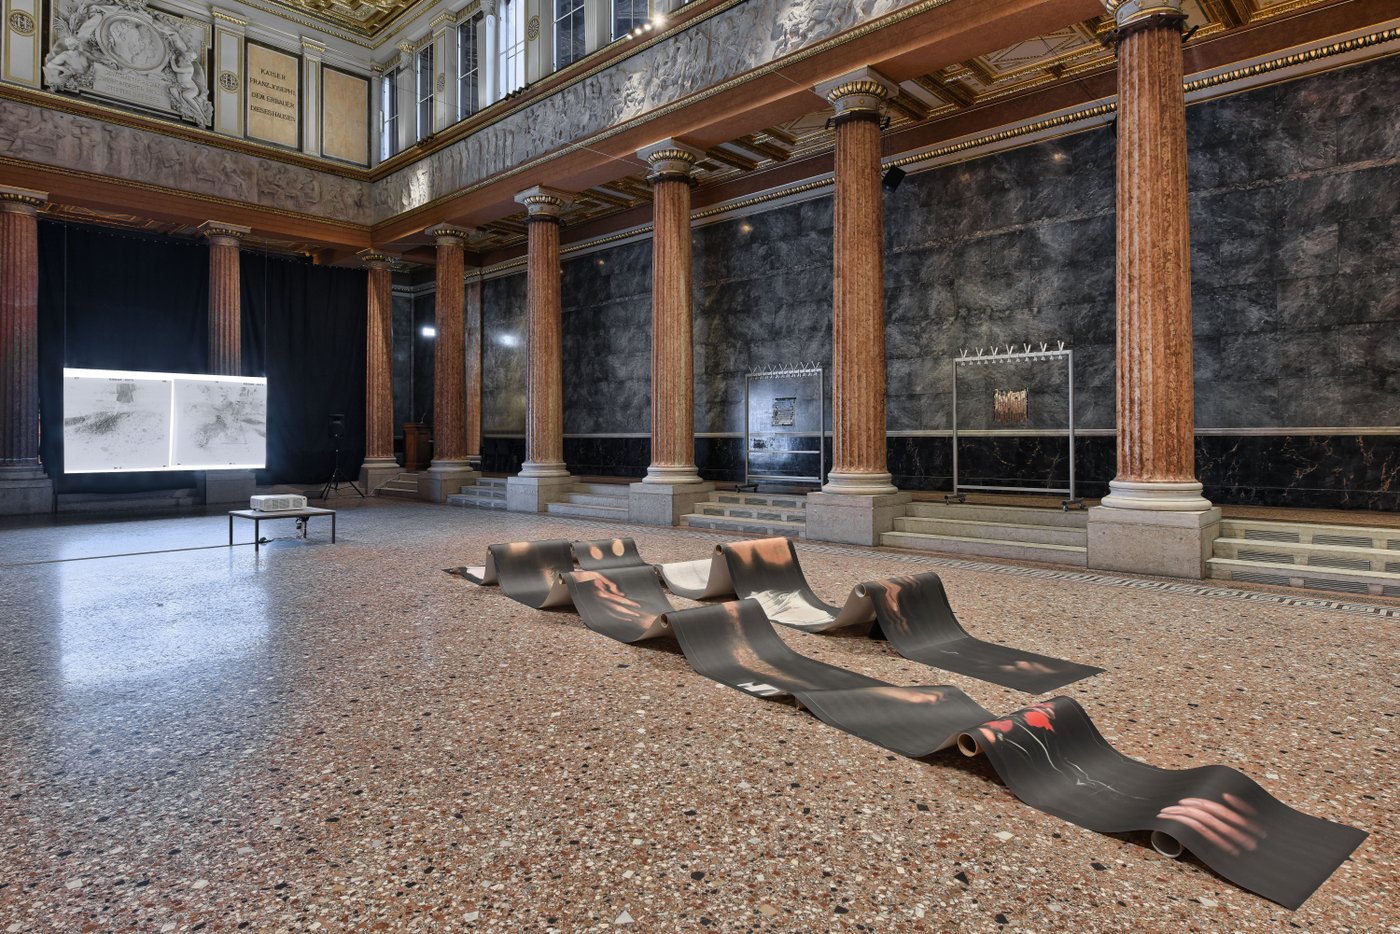 Printed paper webs are laid out on the marbled floor of the auditorium. You can see various projections and an installation with coat racks. The portico of the auditorium and the frieze are also visible.